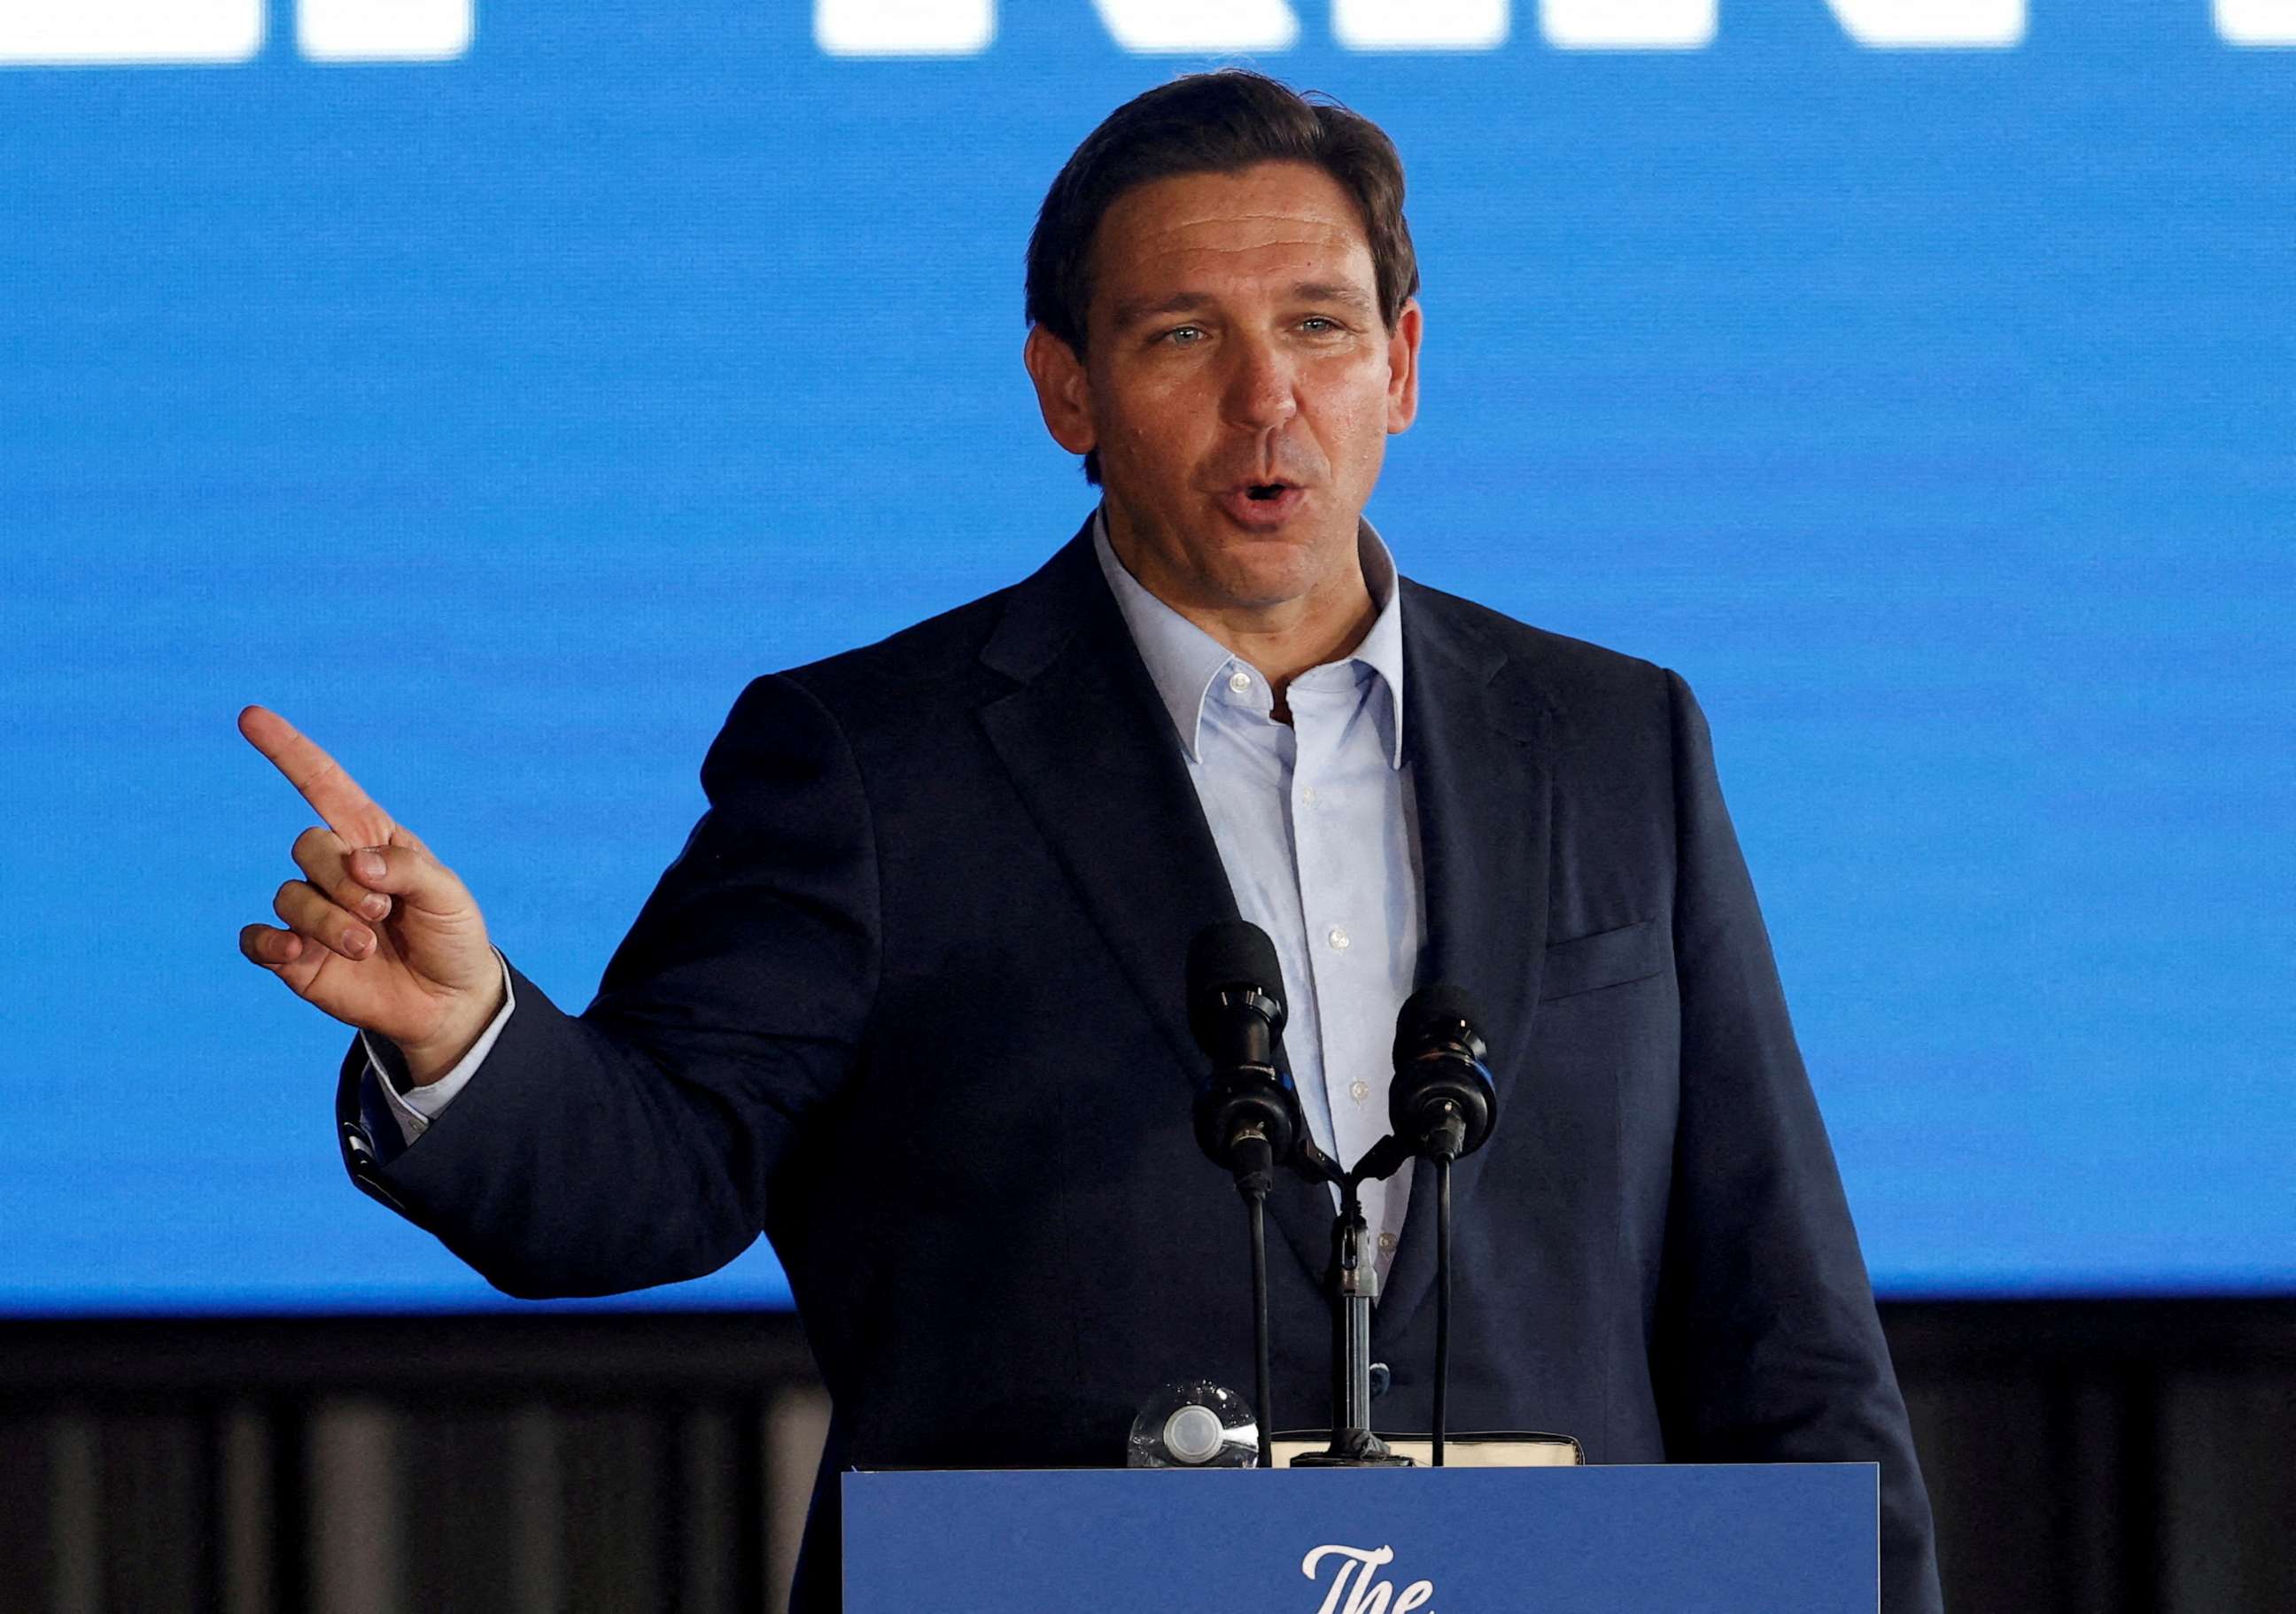 PHOTO: Florida Governor and likely 2024 Republican presidential candidate Ron DeSantis speaks as part of his Florida Blueprint tour in Pinellas Park, Florida, U.S. March 8, 2023. REUTERS/Scott Audette/File Photo